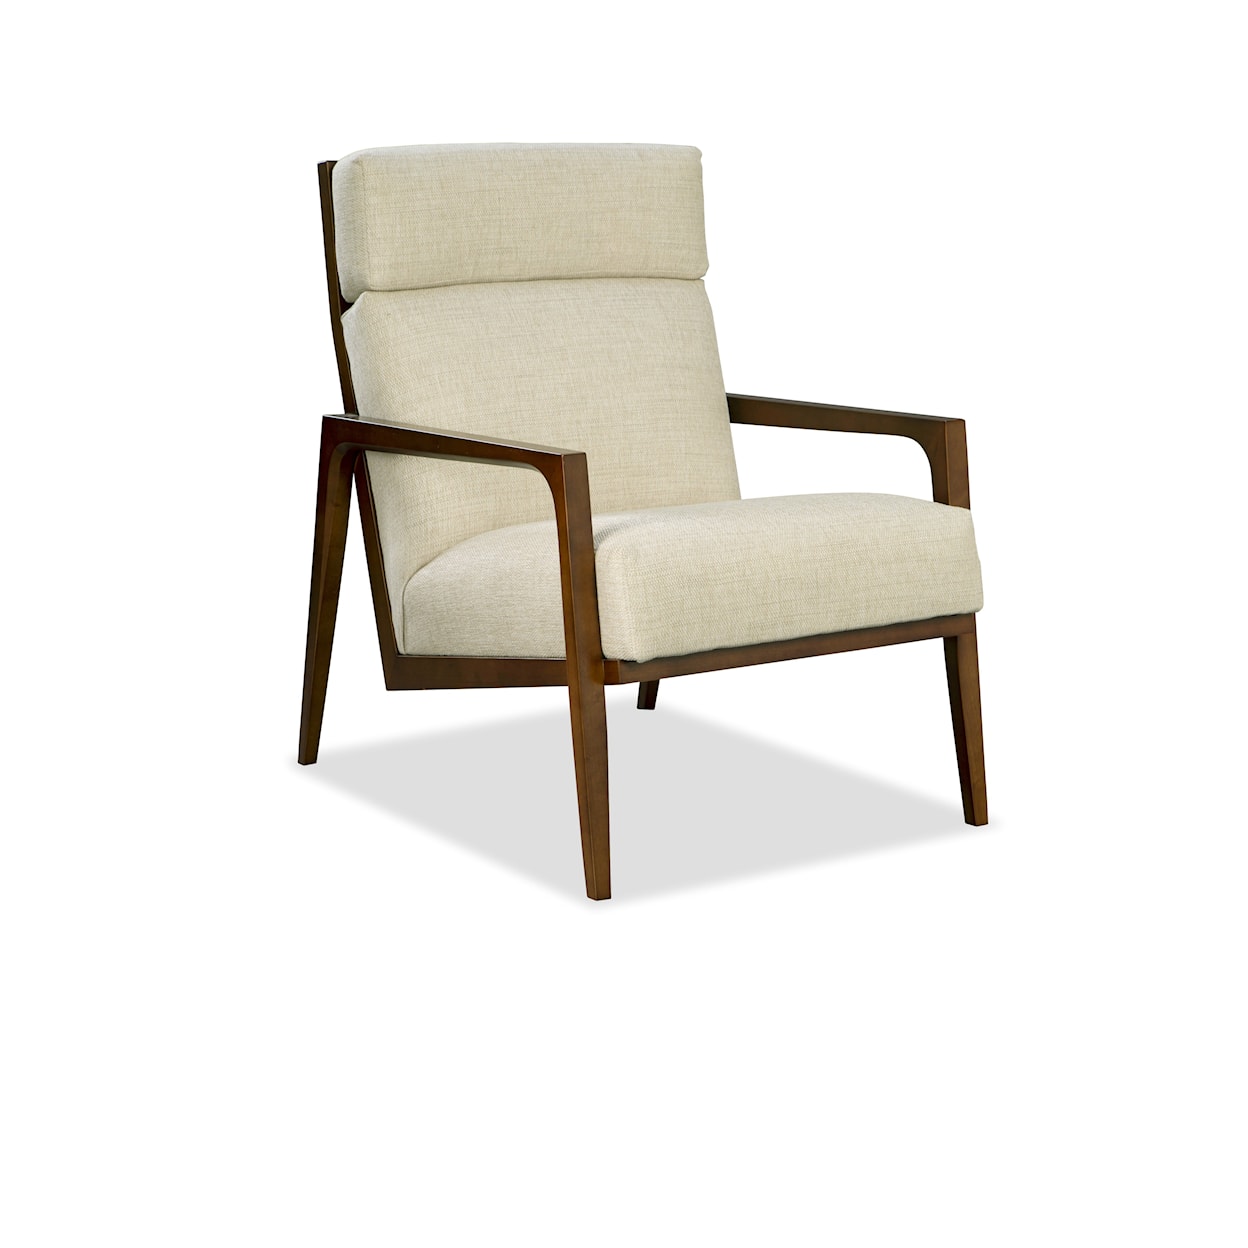 Craftmaster 039110 Accent Chair